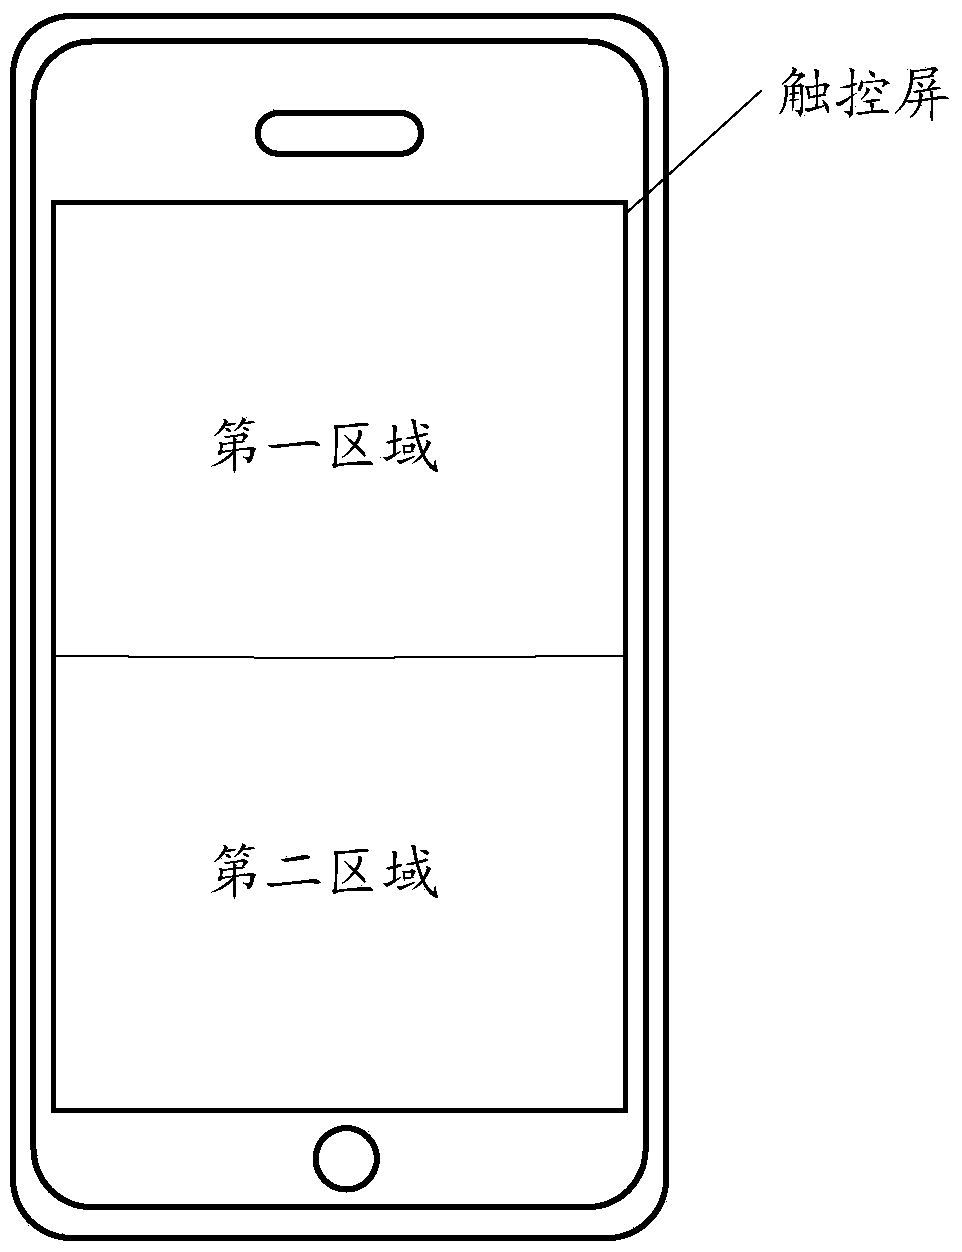 A control command generation method and electronic device